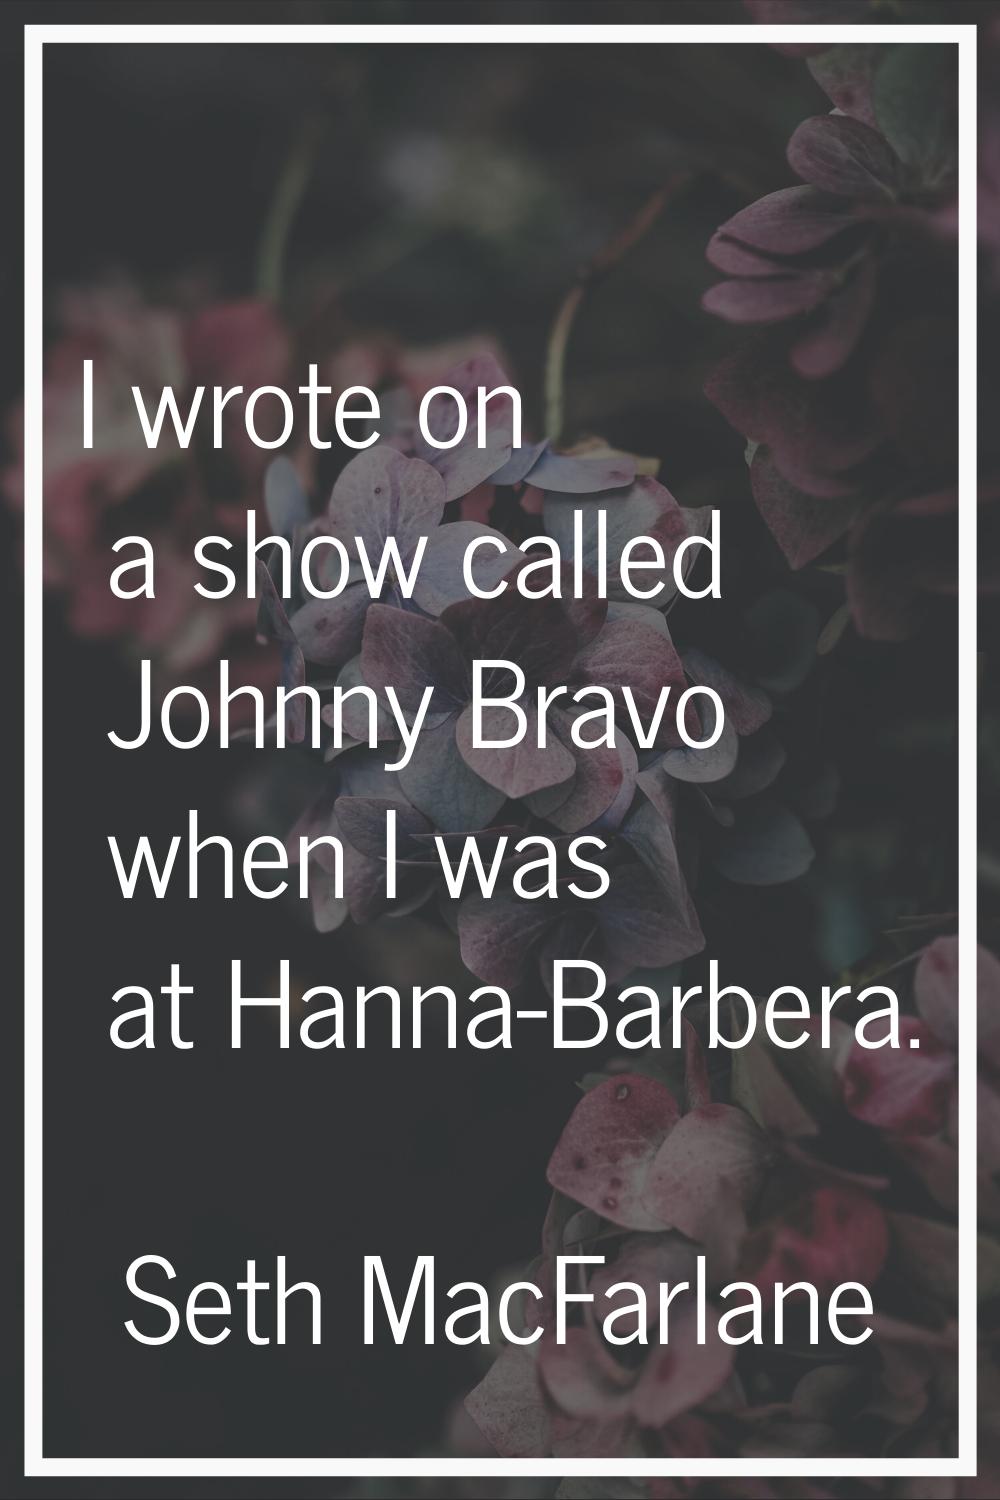 I wrote on a show called Johnny Bravo when I was at Hanna-Barbera.